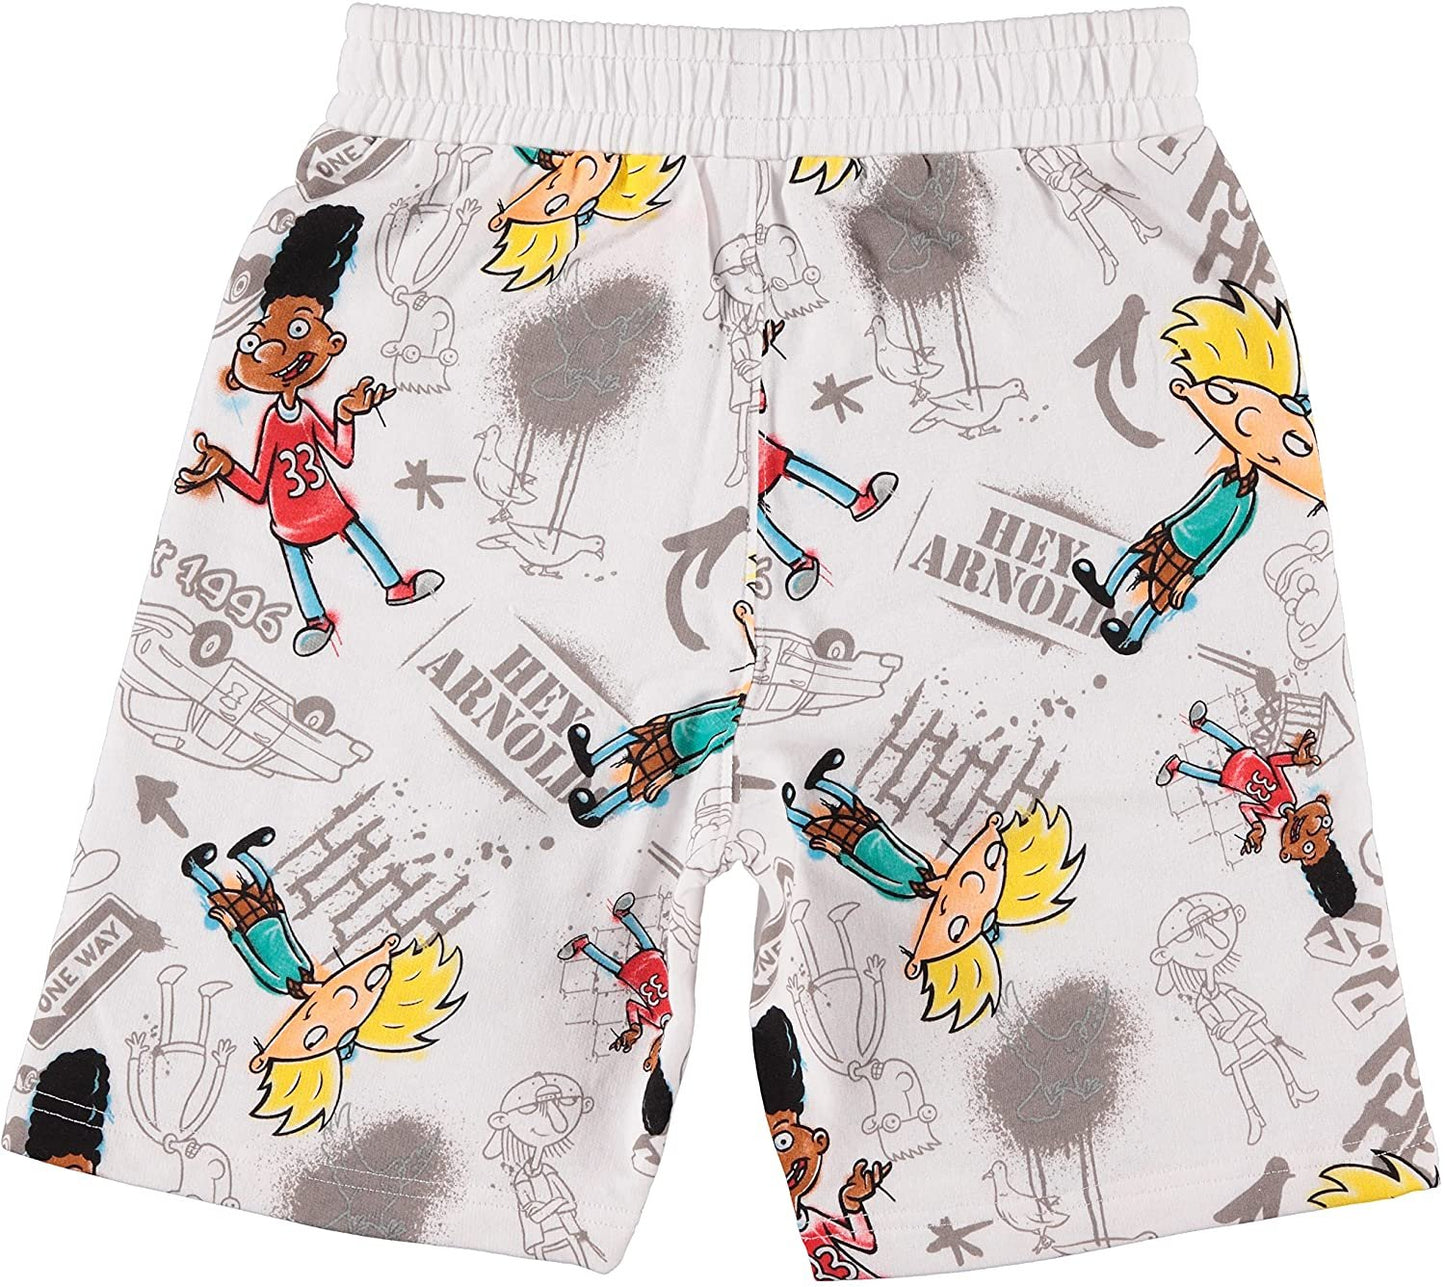 Nickelodeon Rugrats, Hey Arnold, All That Boys Short Sleeve T-Shirt and Shorts Clothing Set